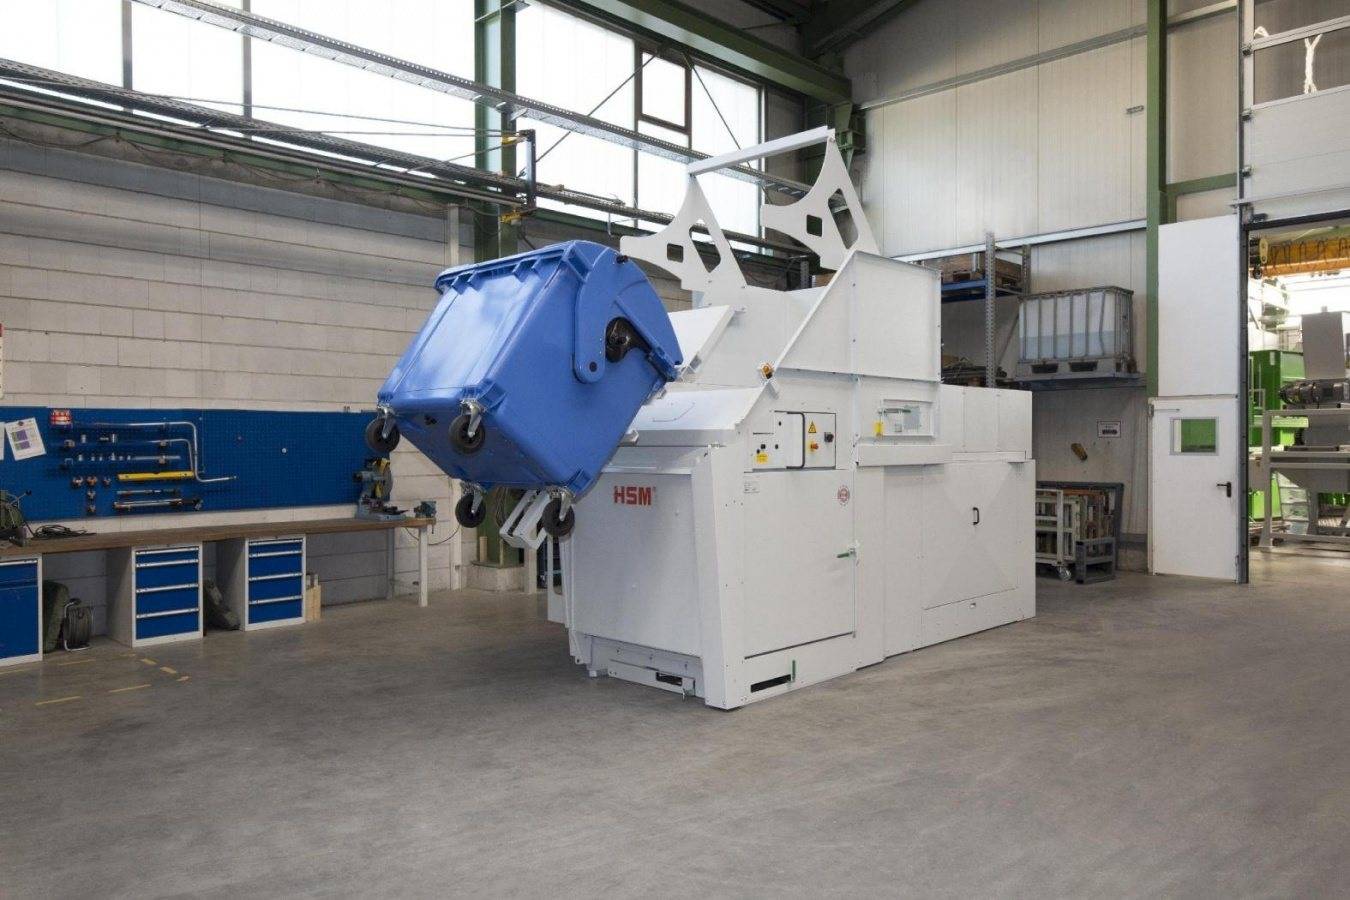 Simple Emptying of large Refuse Containers HSM HL 7009 MGB – the compact horizontal baling press for industry 